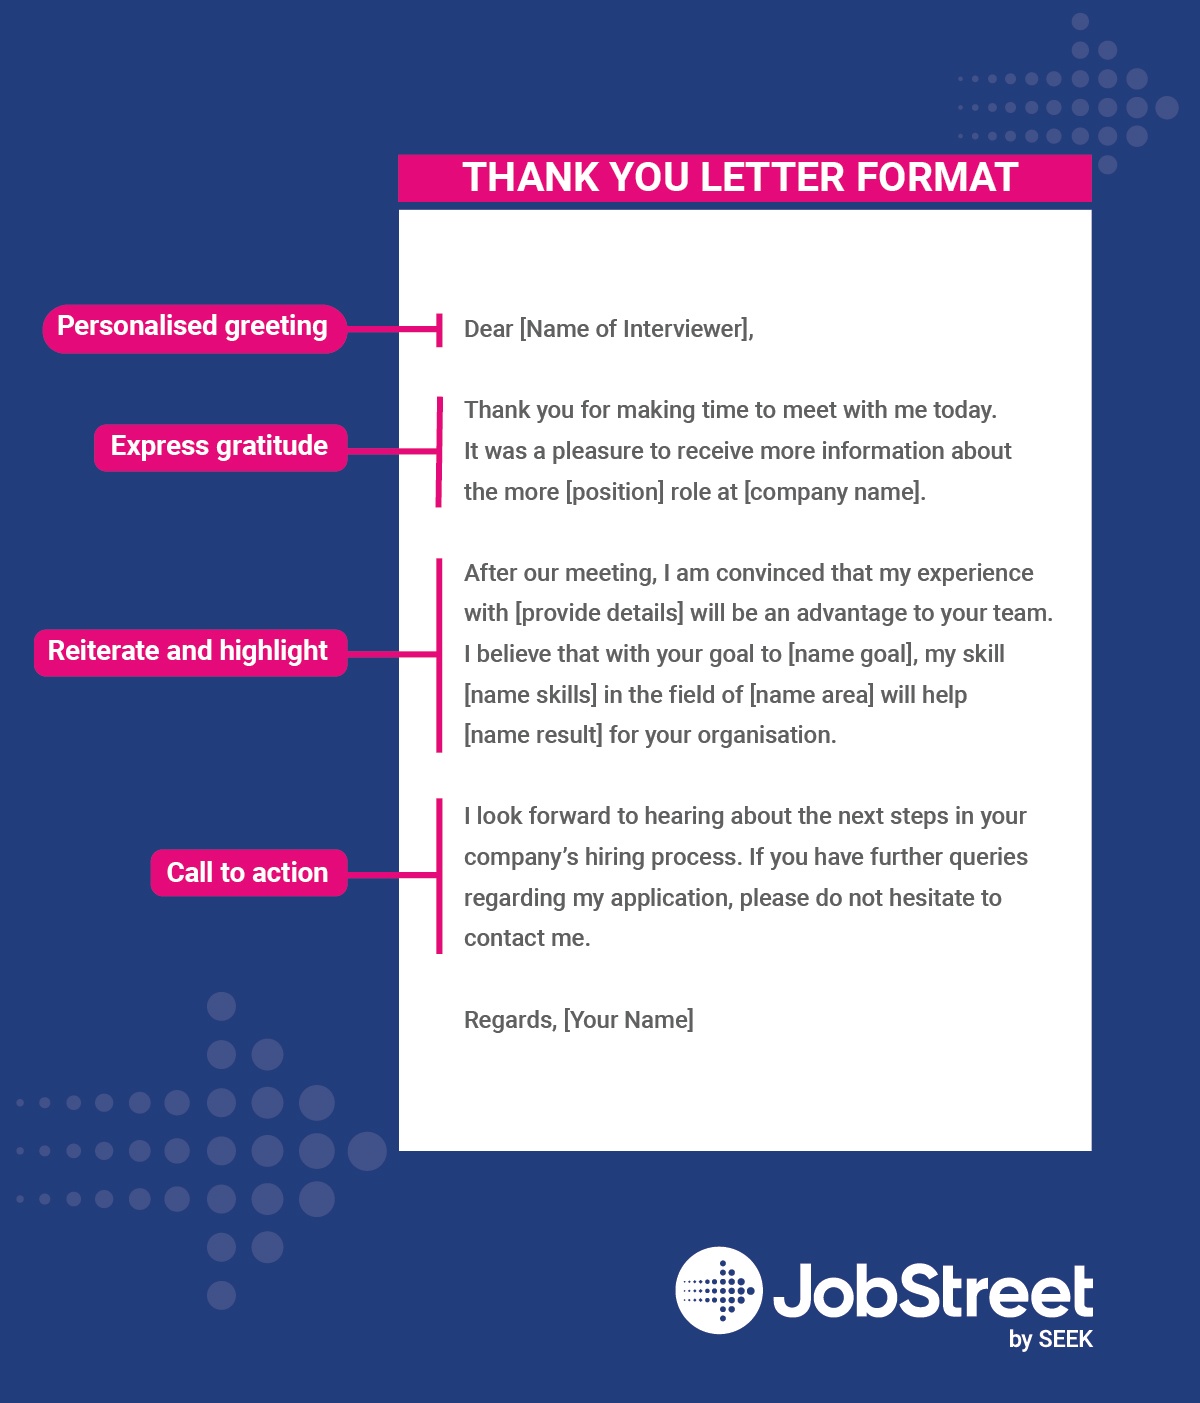 What to include in a thank you email